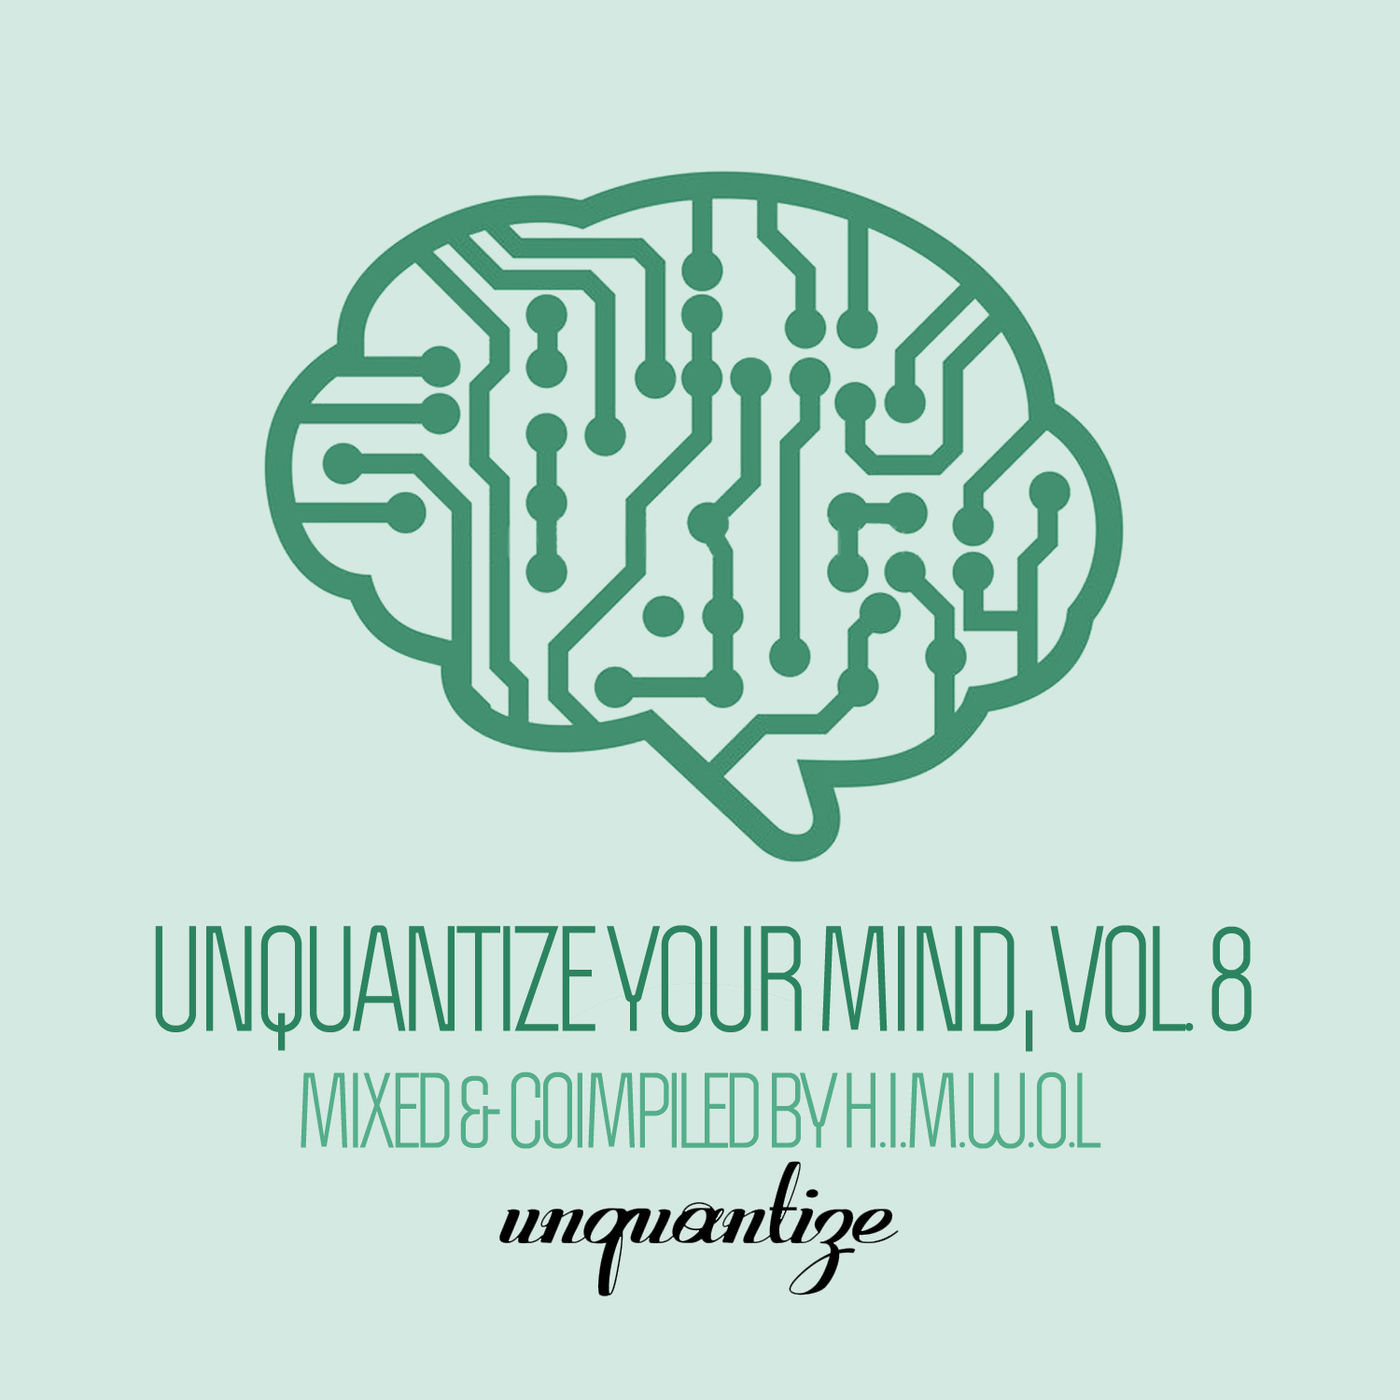 VA - Unquantize Your Mind Vol. 8 - Compiled & Mixed by H.I.M.W.O.L / unquantize